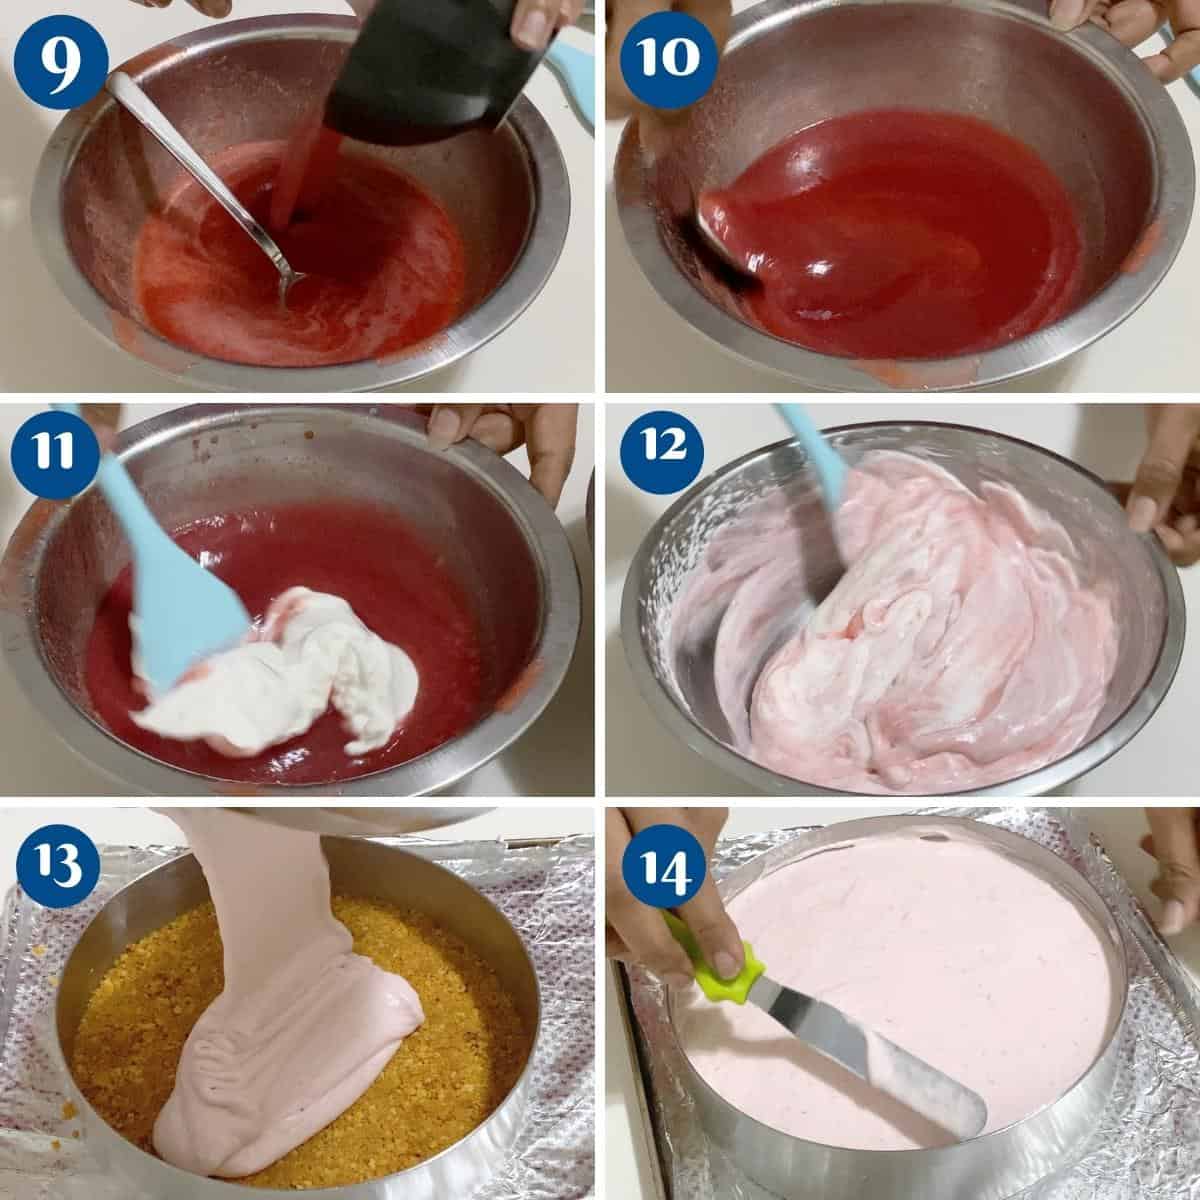 Progress pictures making the strawberry mousse.